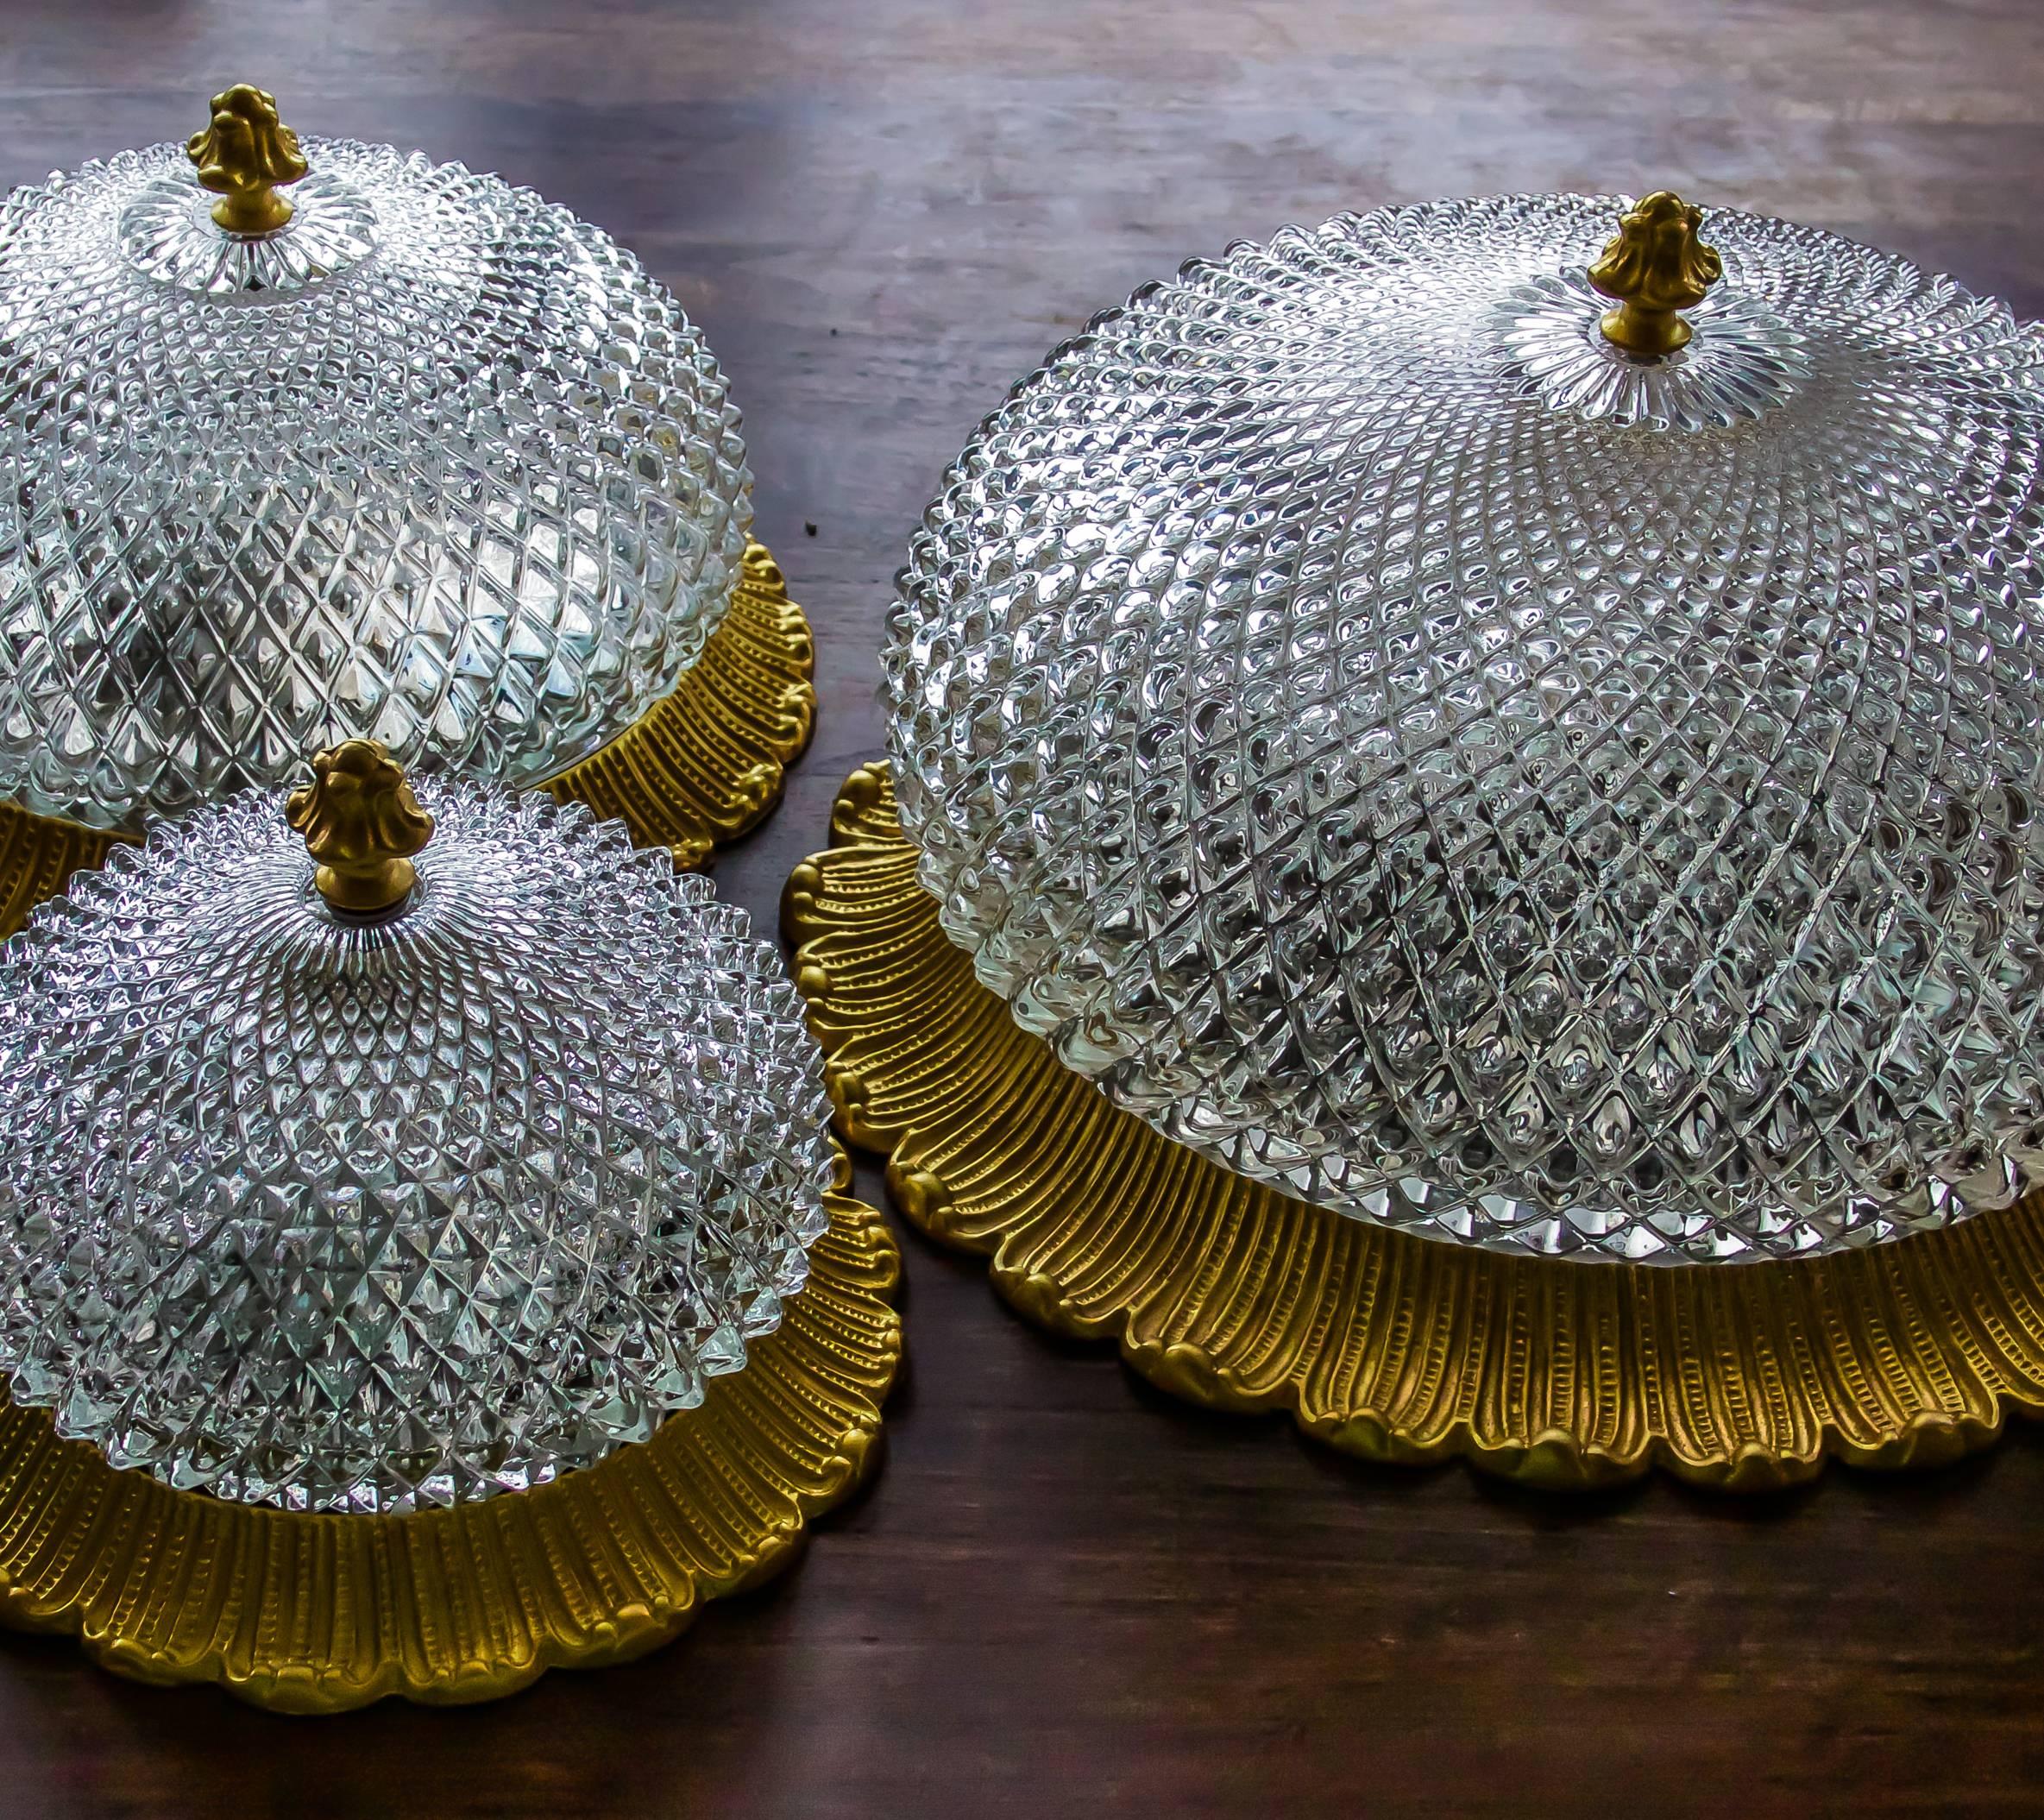 These Plafoniere lights have a romantic, neoclassical appear on a gilt cast iron frame that carry the textured crystal glass globe with its blossom top.

All three flush mount, wall or ceiling lights are in perfect condition and make a great